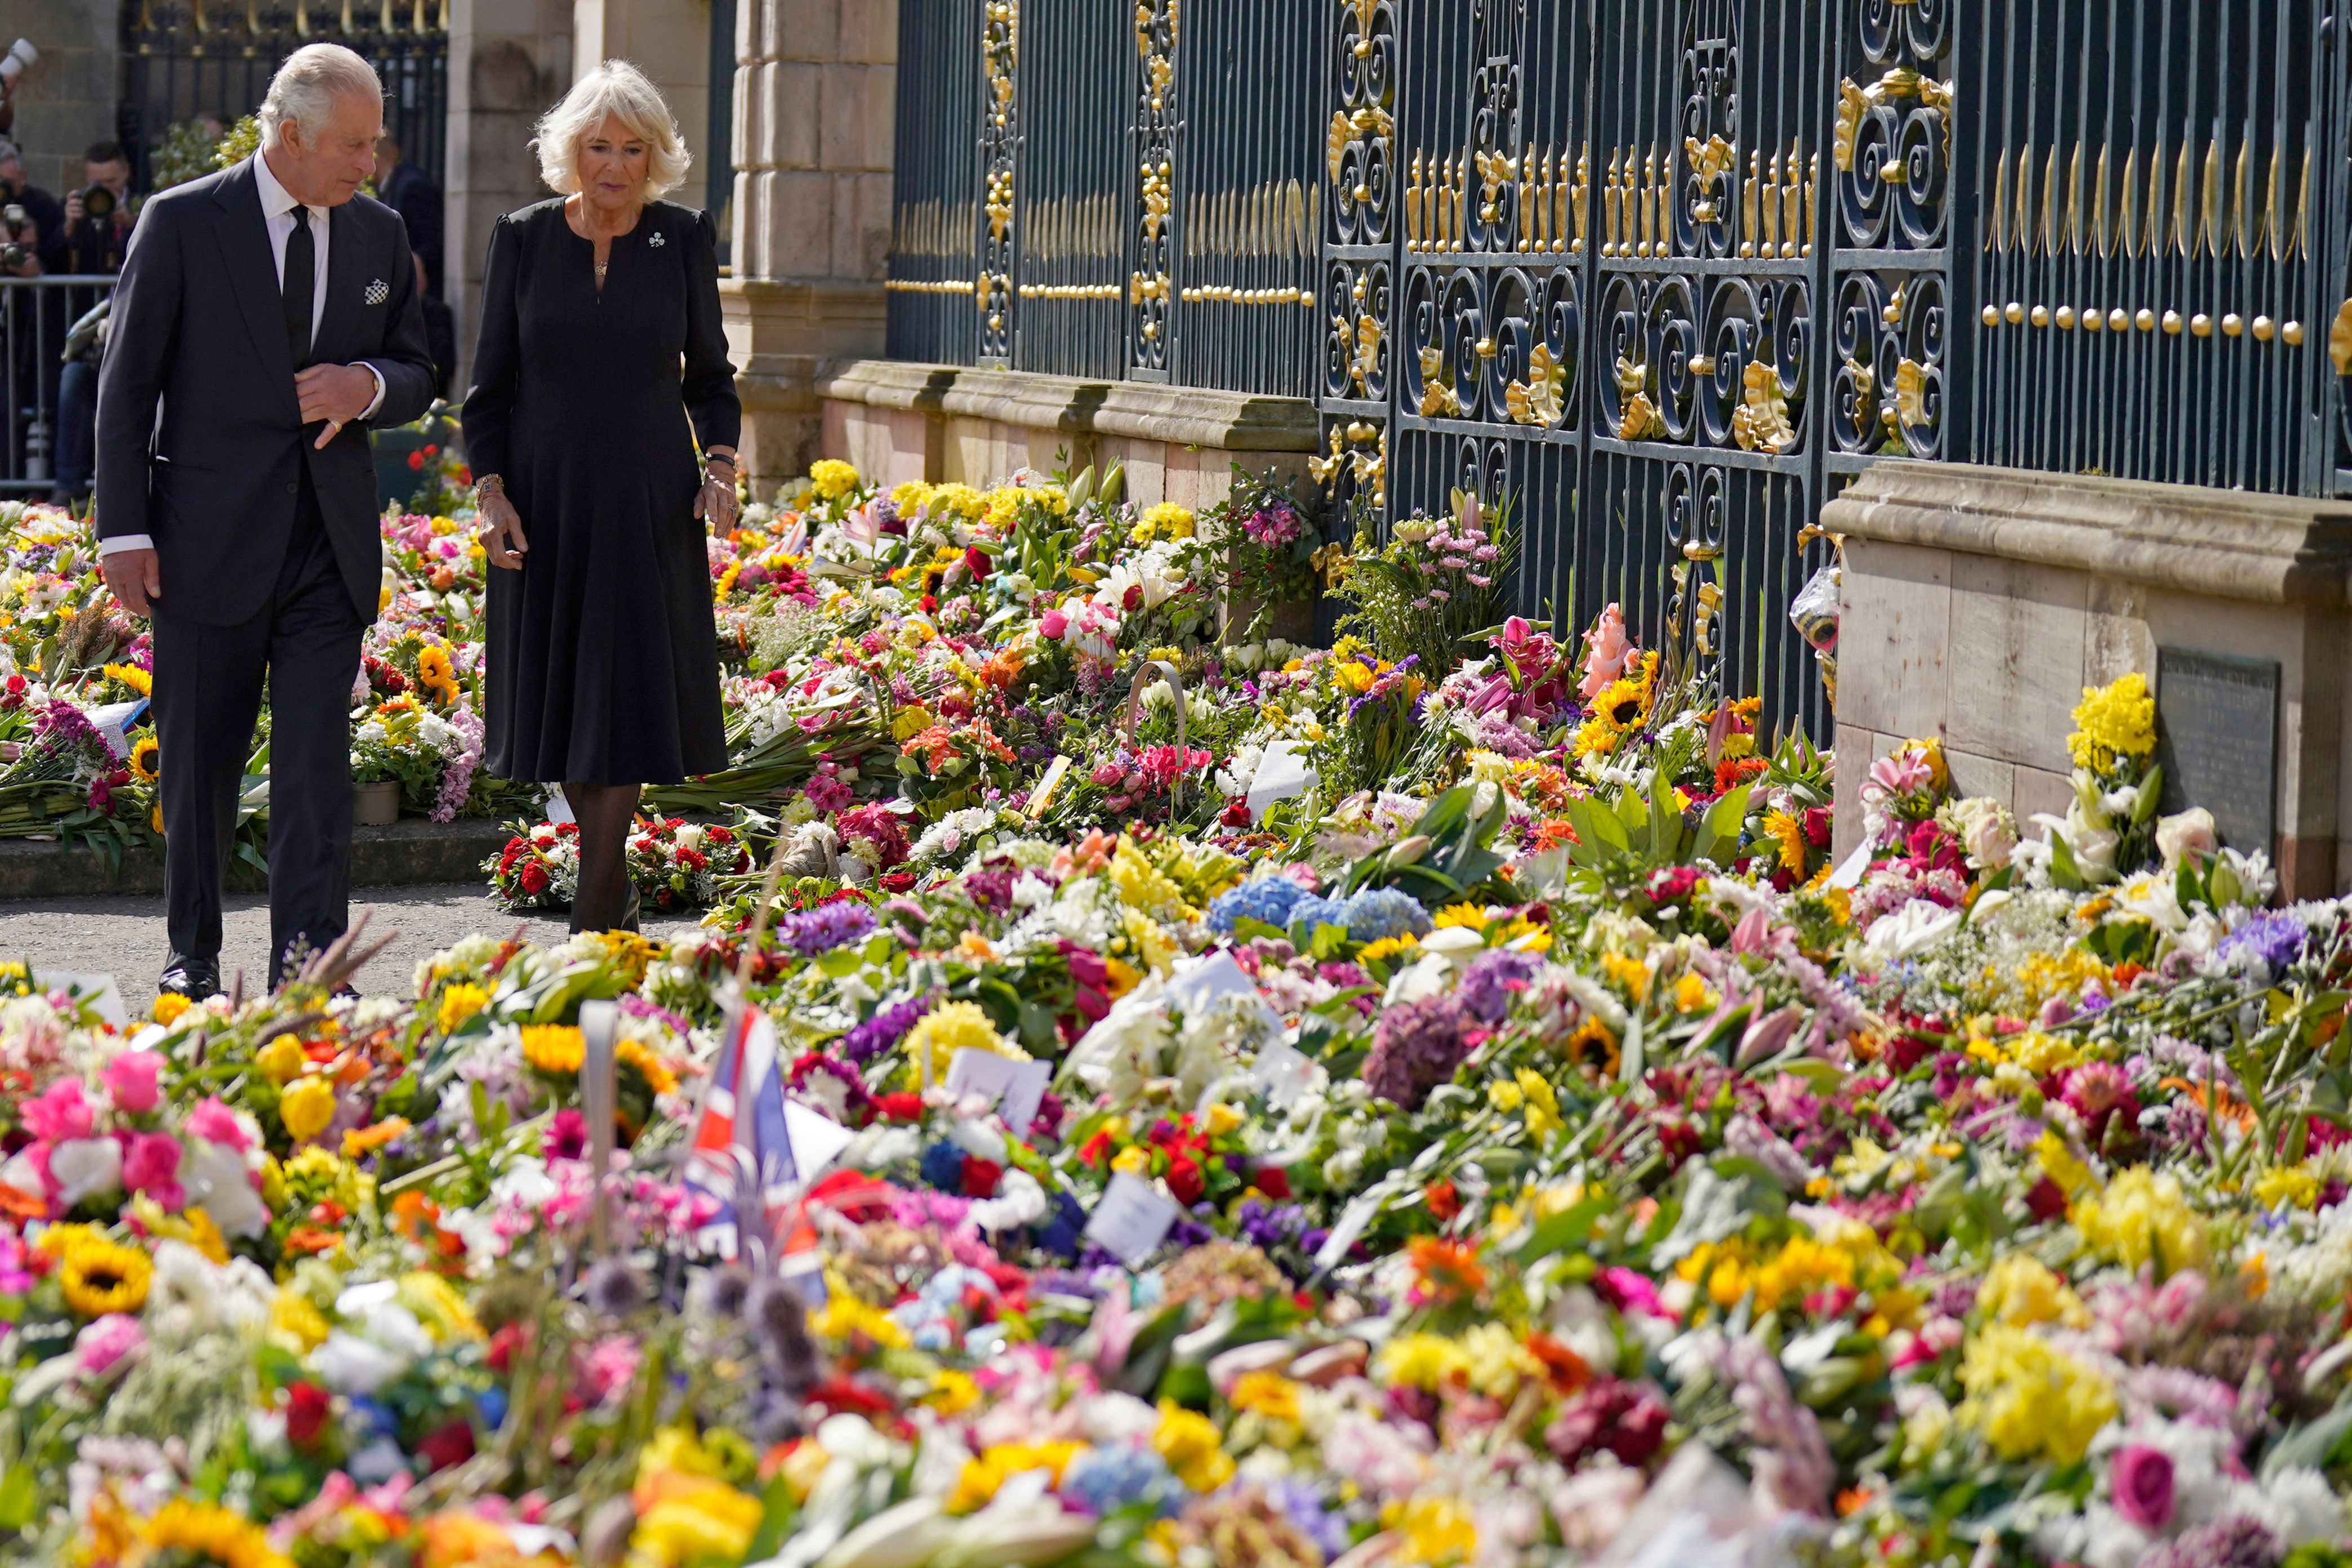 <p>Britain's King Charles III and Camilla, Queen Consort view floral tributes left outside Hillsborough Castle in Belfast, Northern Ireland, on Sept. 13, 2022, during his visit to the U.K. nation in the wake of his mother Queen Elizabeth II's <a href="https://www.wonderwall.com/celebrity/celebrities-dignitaries-react-to-death-of-queen-elizabeth-ii-647756.gallery">death five days earlier</a>.</p>